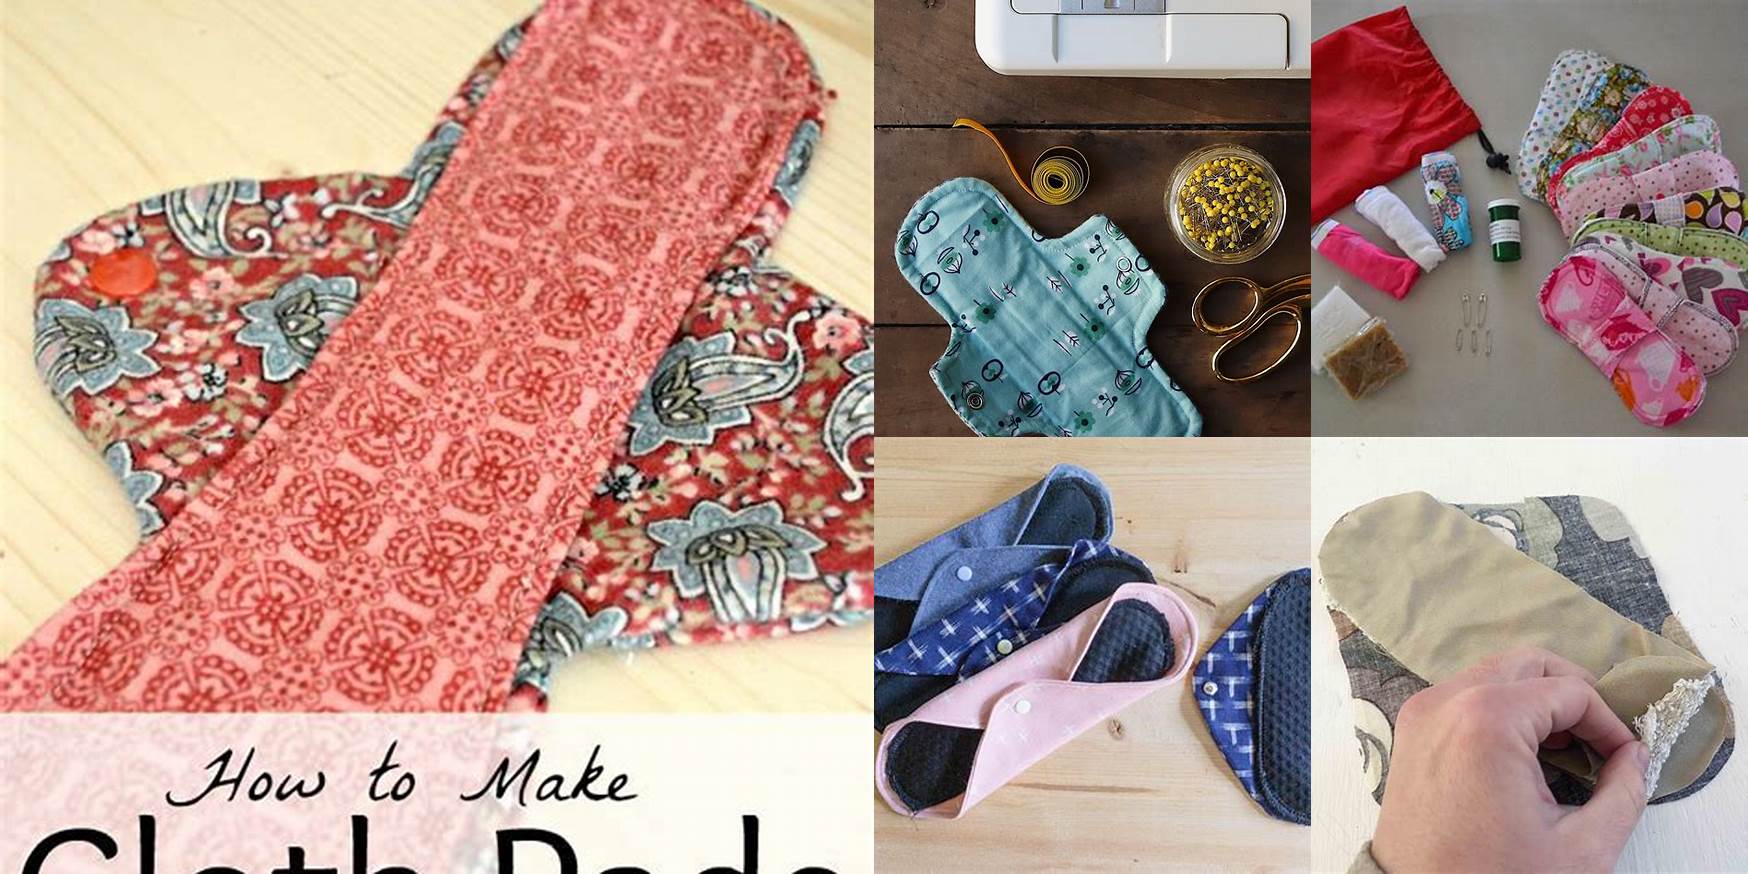 How To Make Cloth Pads By Hand